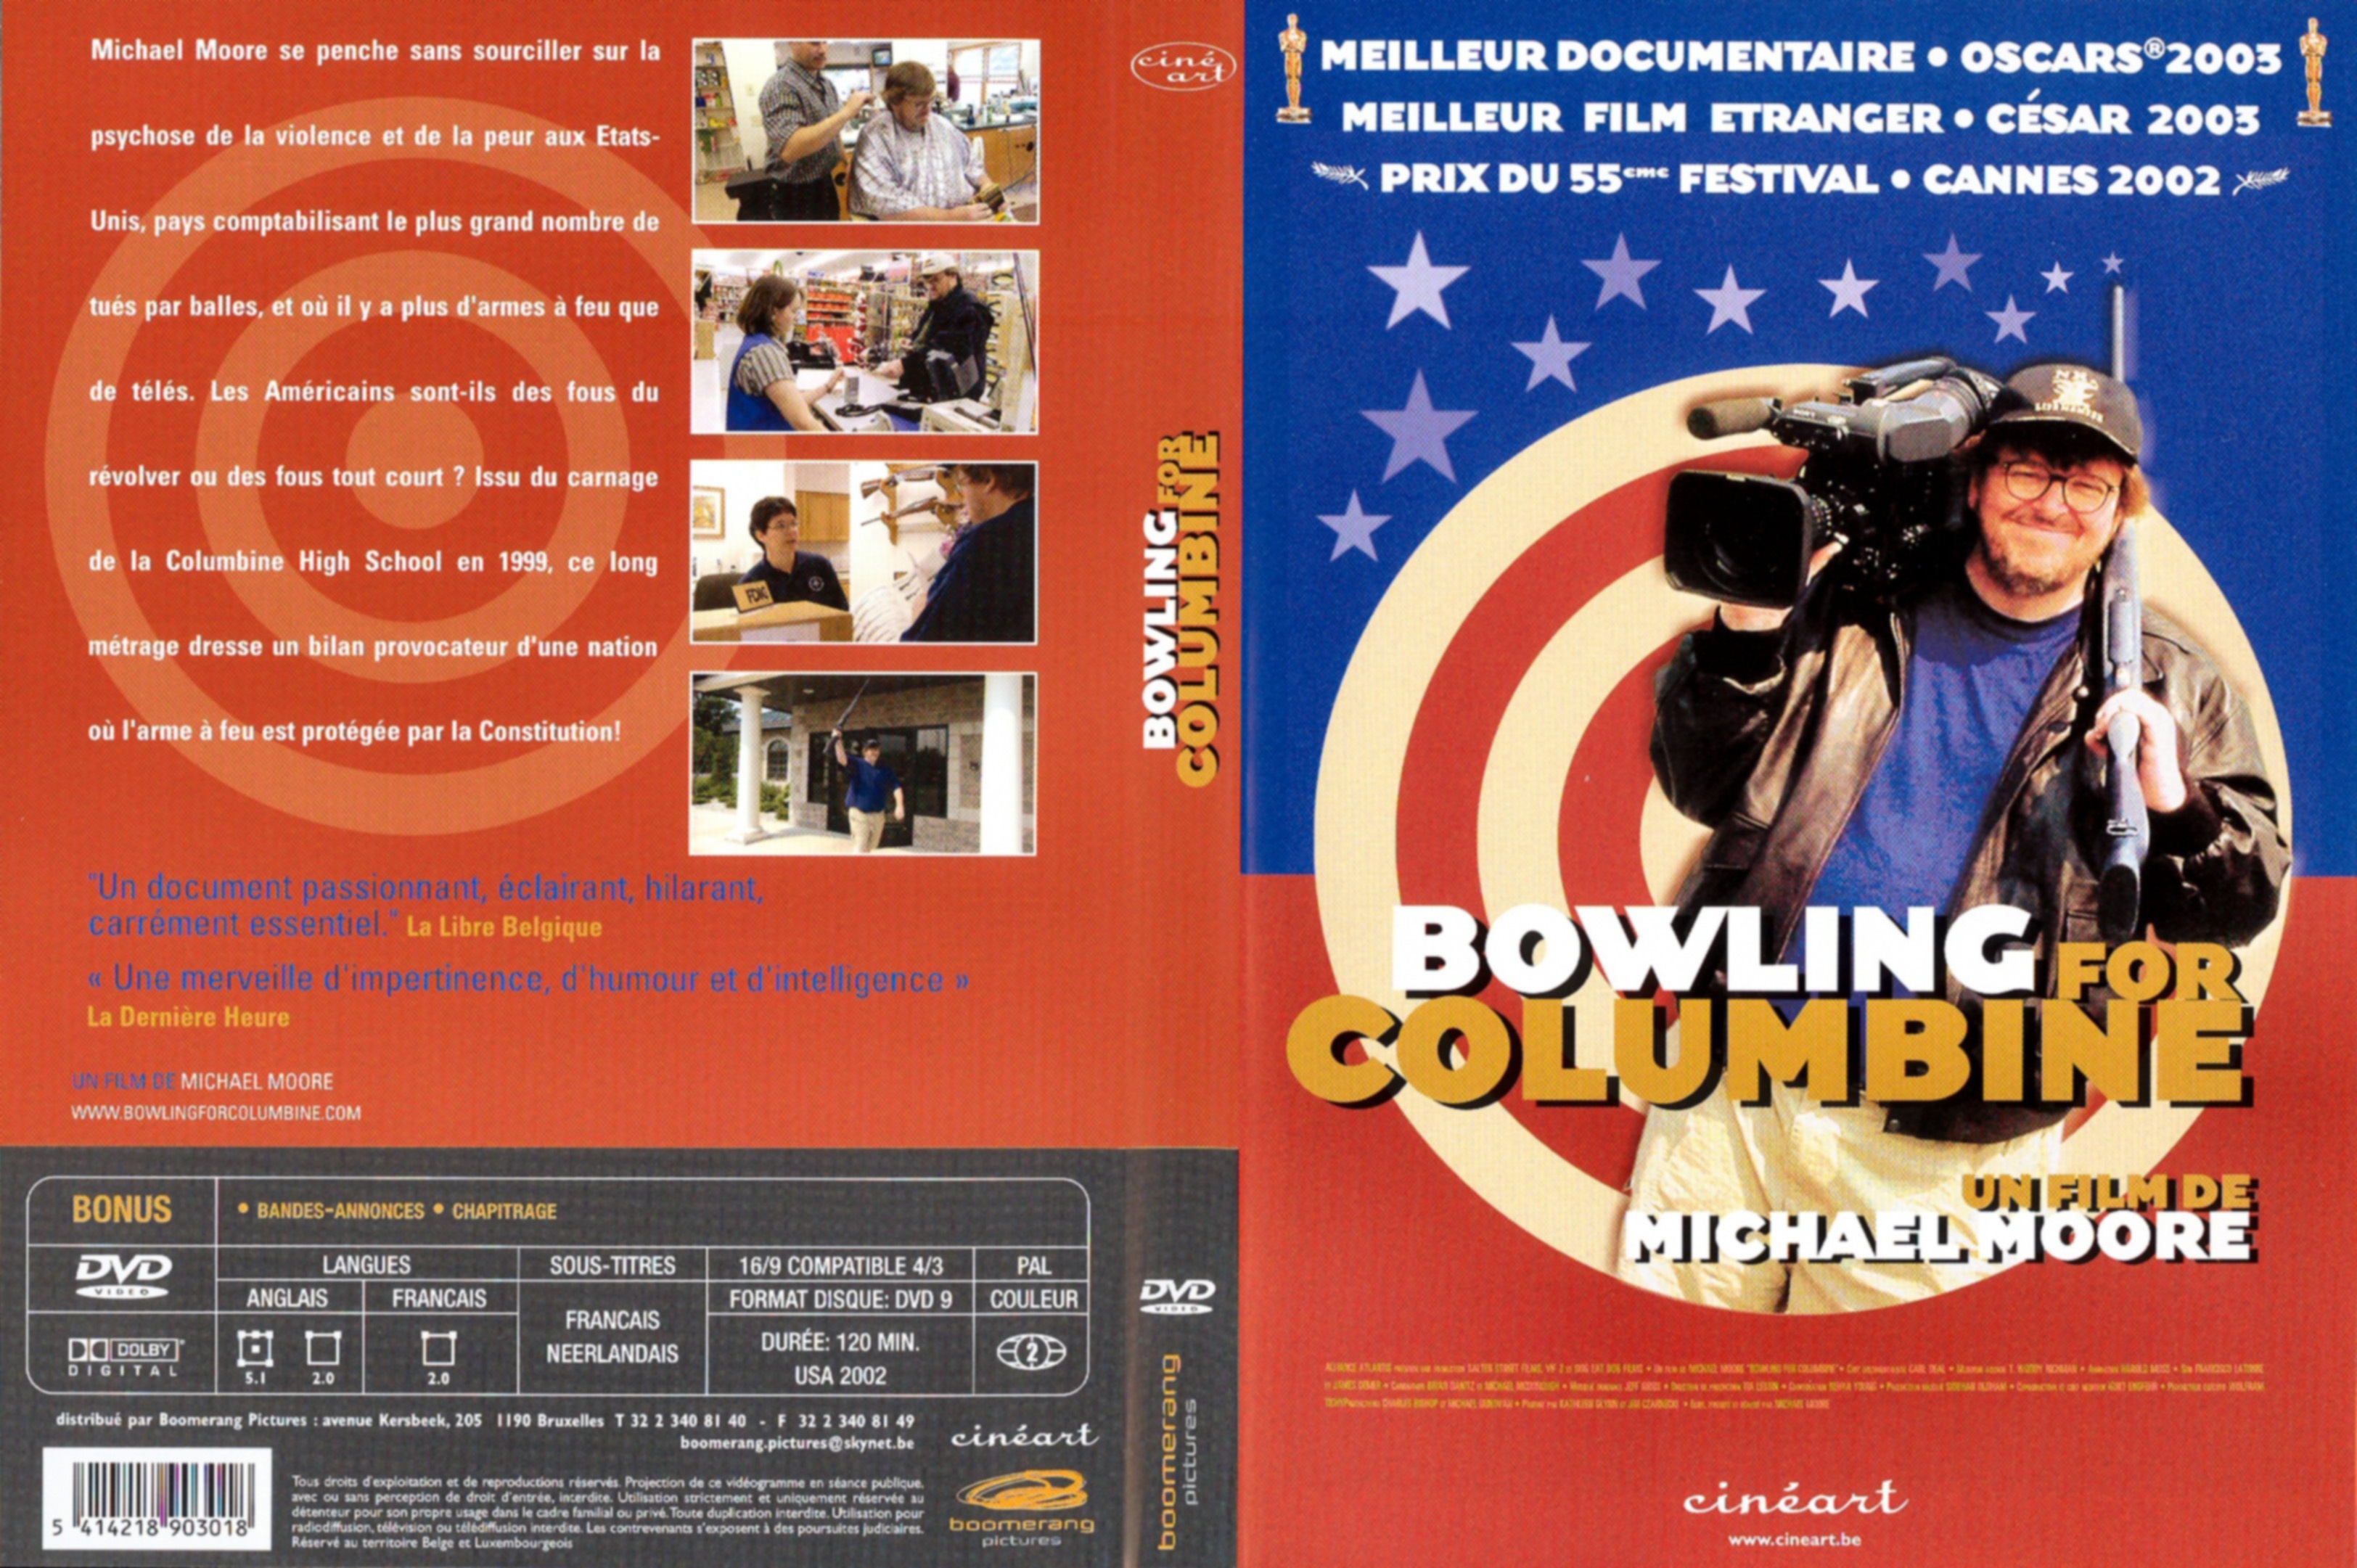 Jaquette DVD Bowling for Columbine